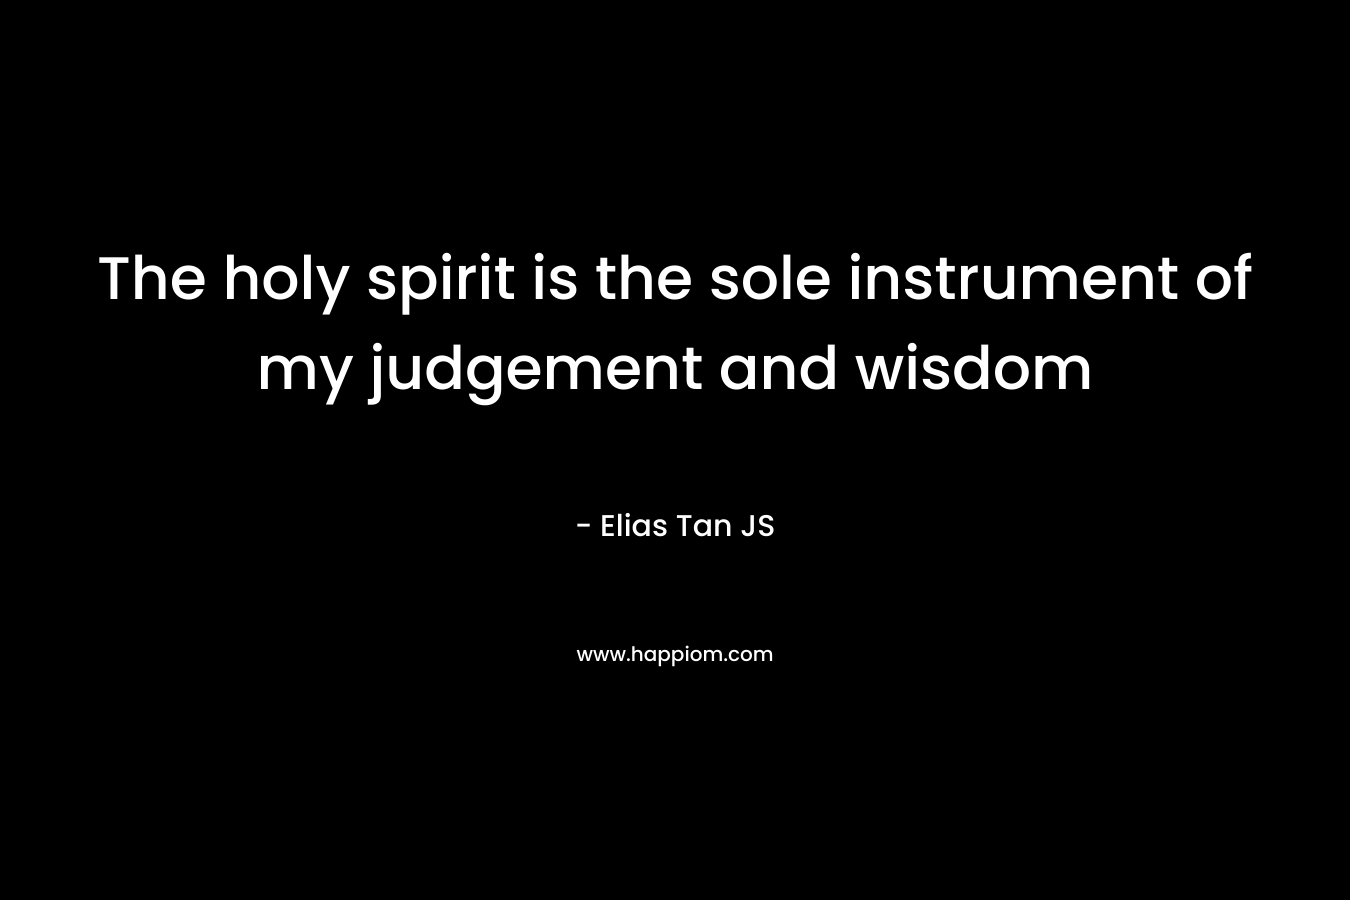 The holy spirit is the sole instrument of my judgement and wisdom